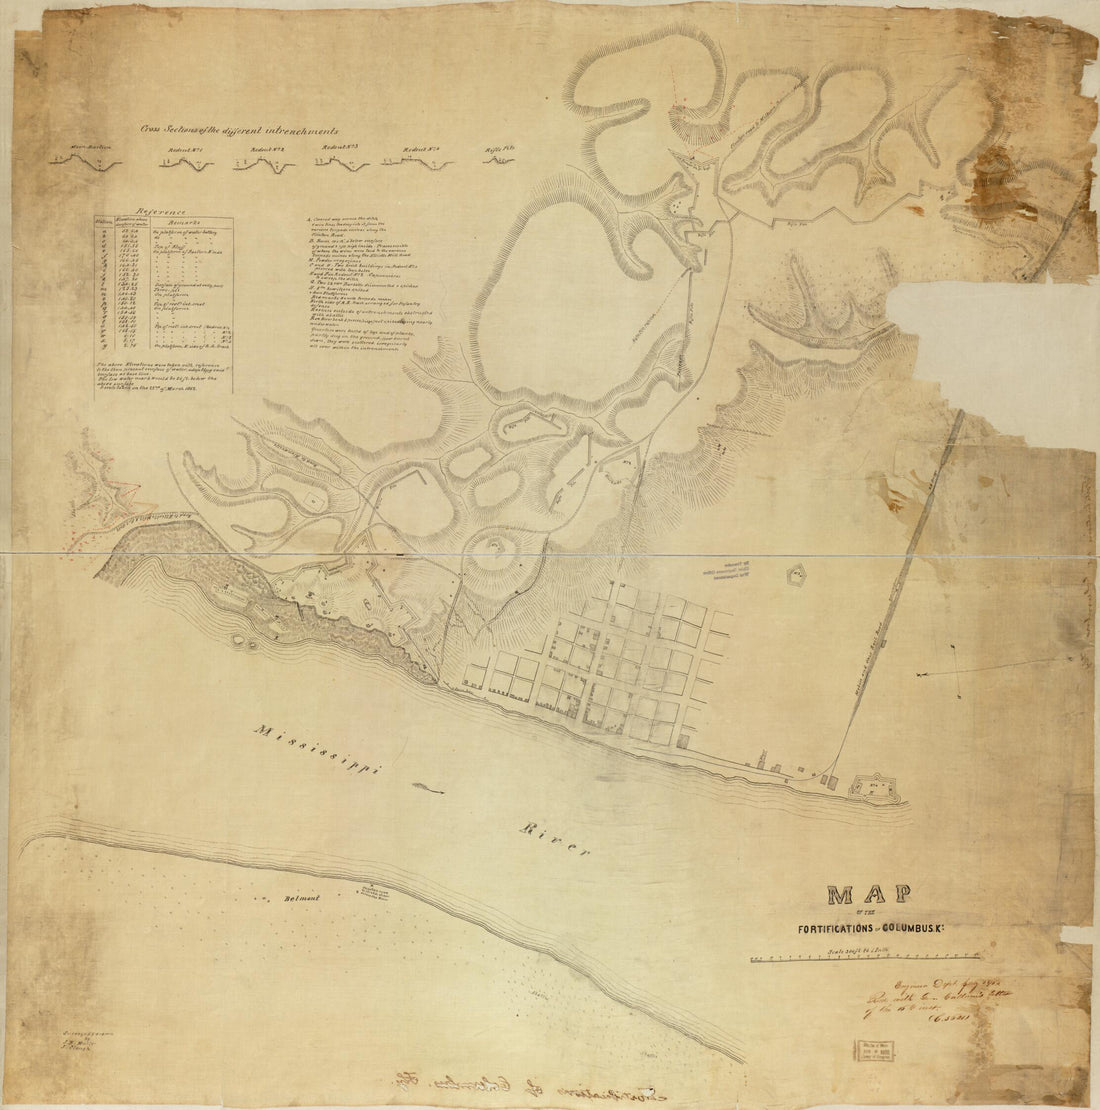 This old map of Map of the Fortifications of Columbus, Ky. (Fortifications of Columbus, Ky) from 1862 was created by J. Clough, John B. Muller in 1862